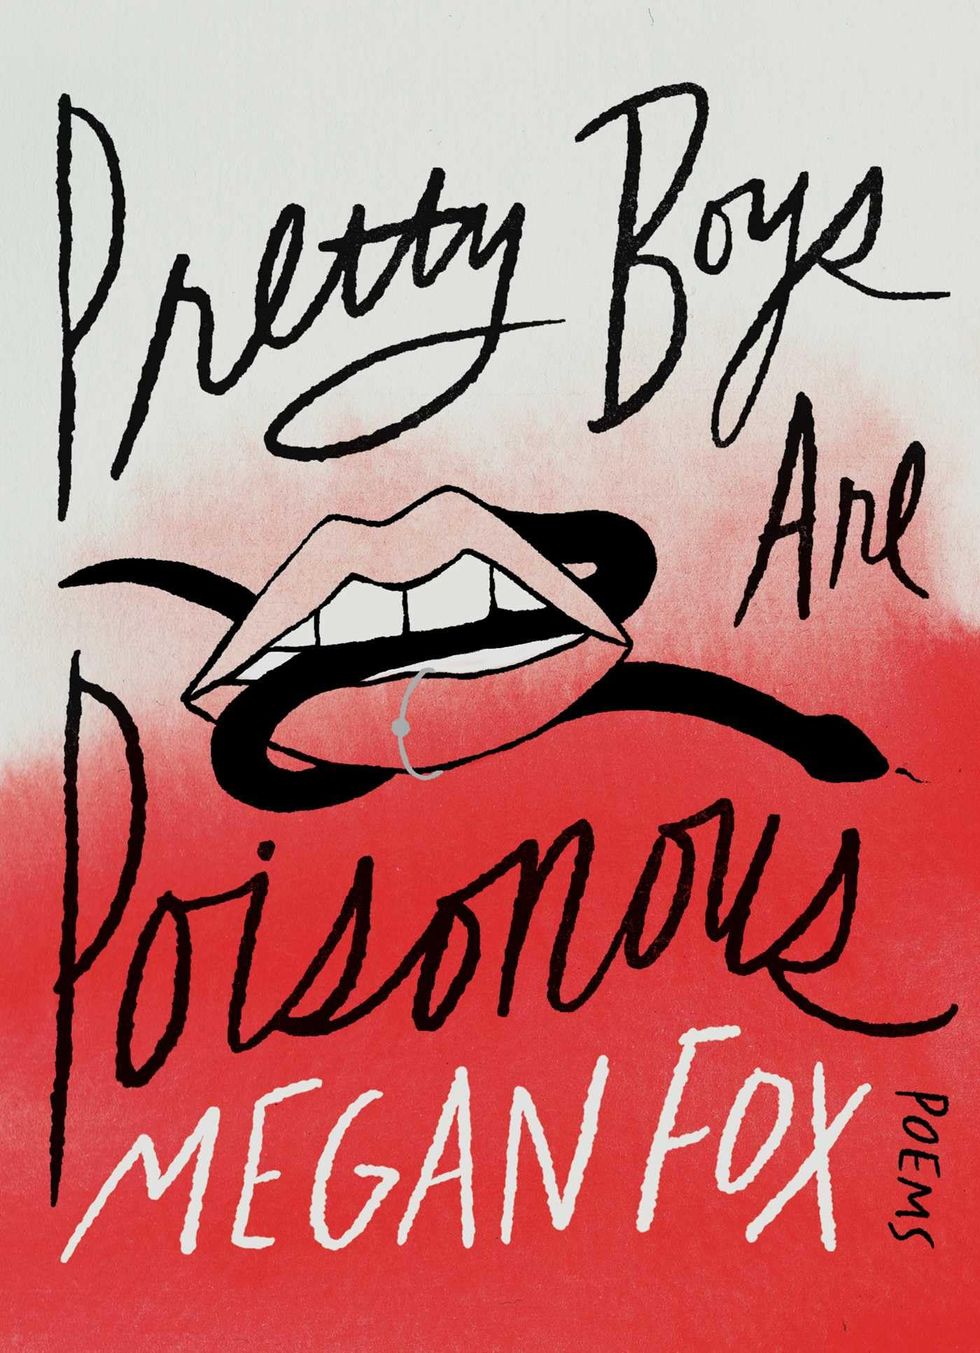 <i>Pretty Boys Are Poisonous: Poems</i>, by Megan Fox